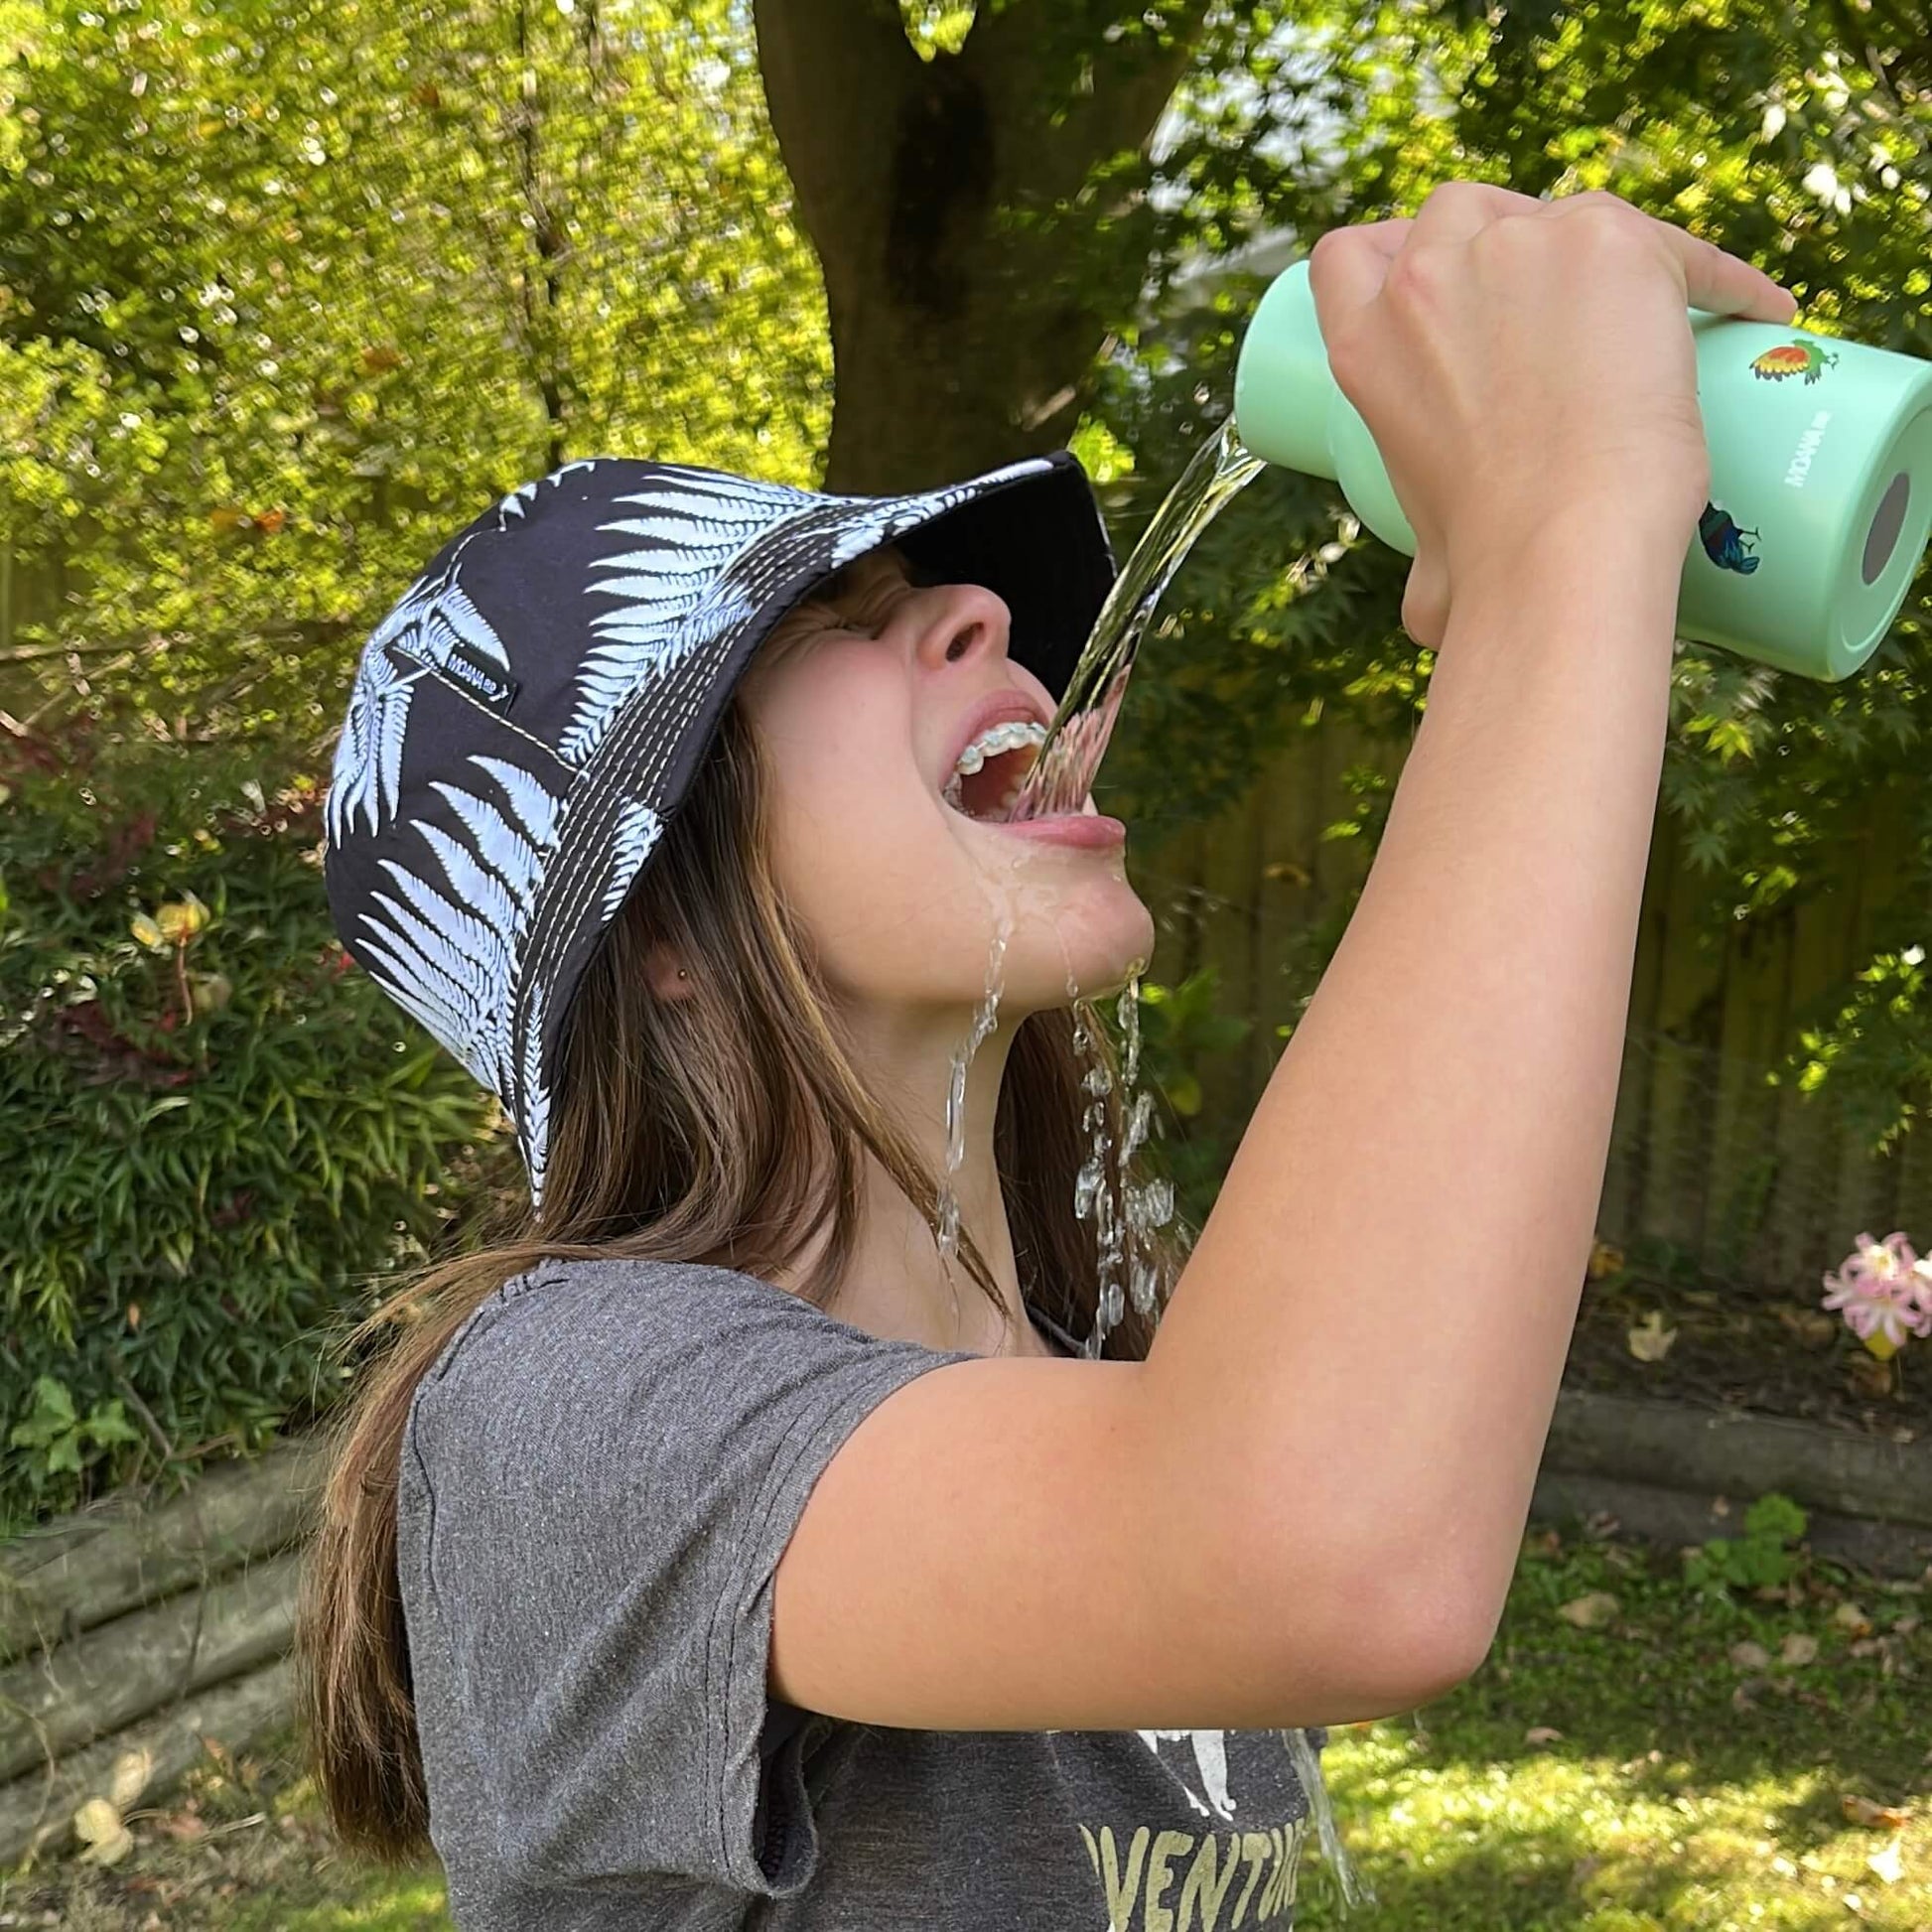 Young girl pouring water from a drink bottle into her mouth.